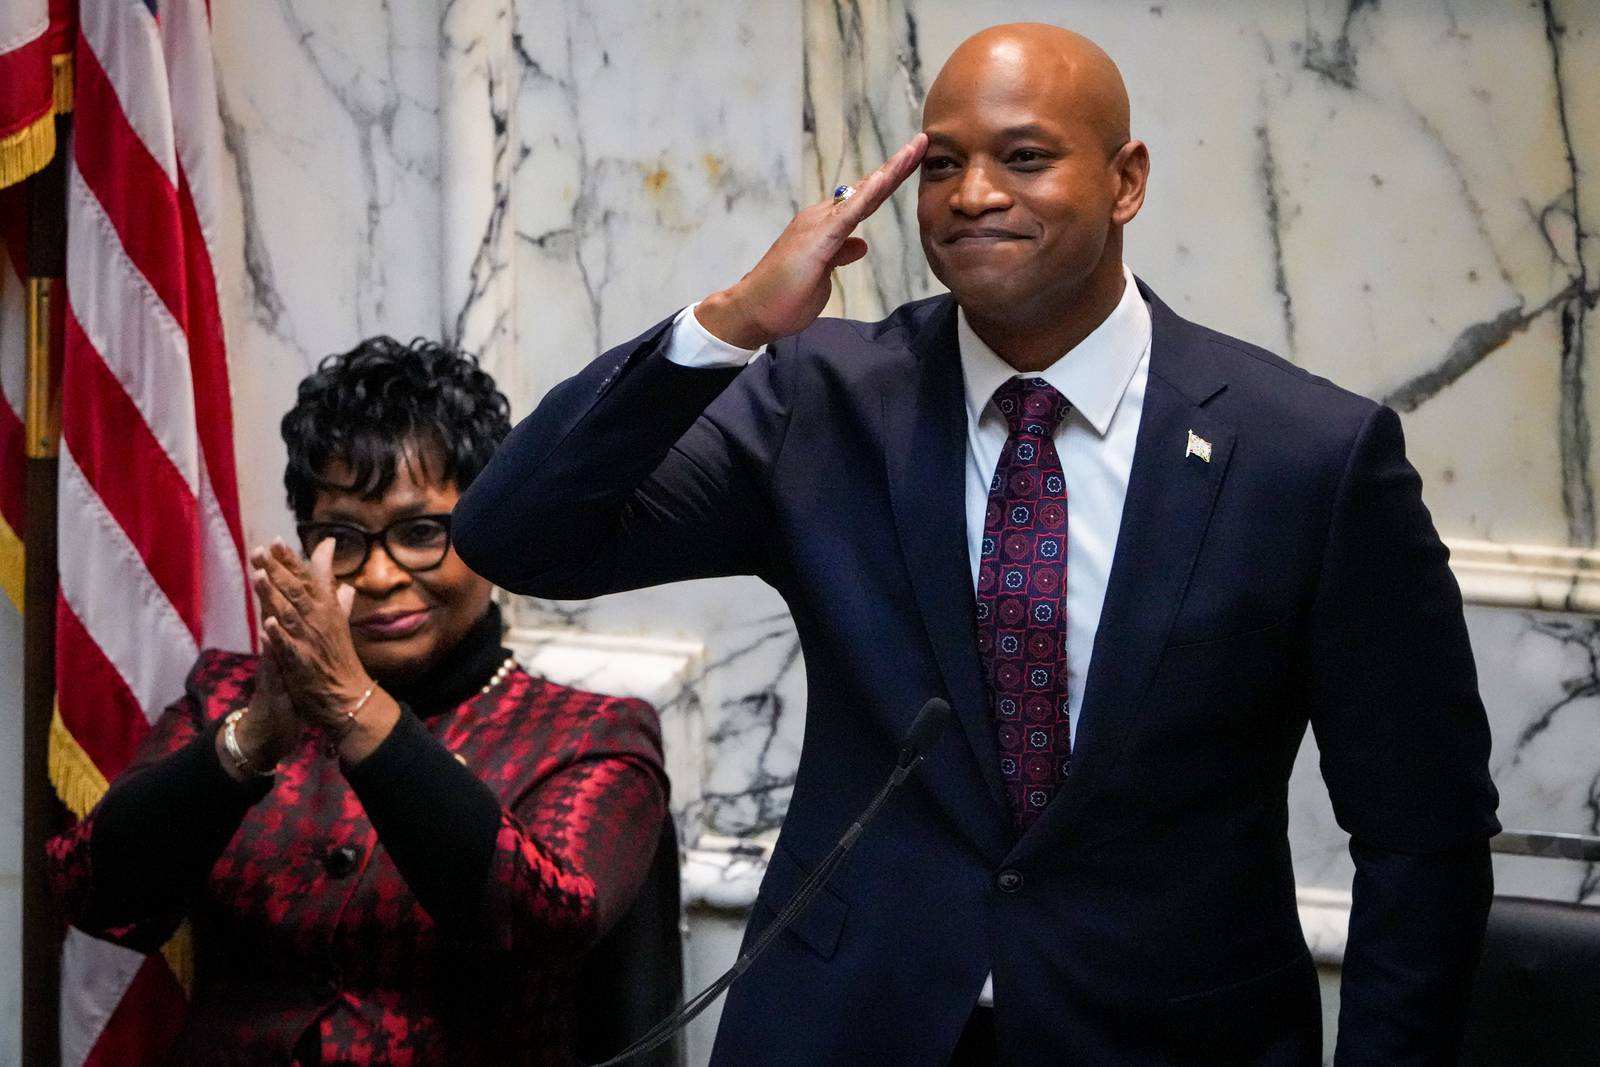 Gov. Wes Moore, standing in front of House of Delegates Speaker Adrienne A. Jones, salutes as he delivers his first State of the State address on 2/1/23 at the Maryland State House.